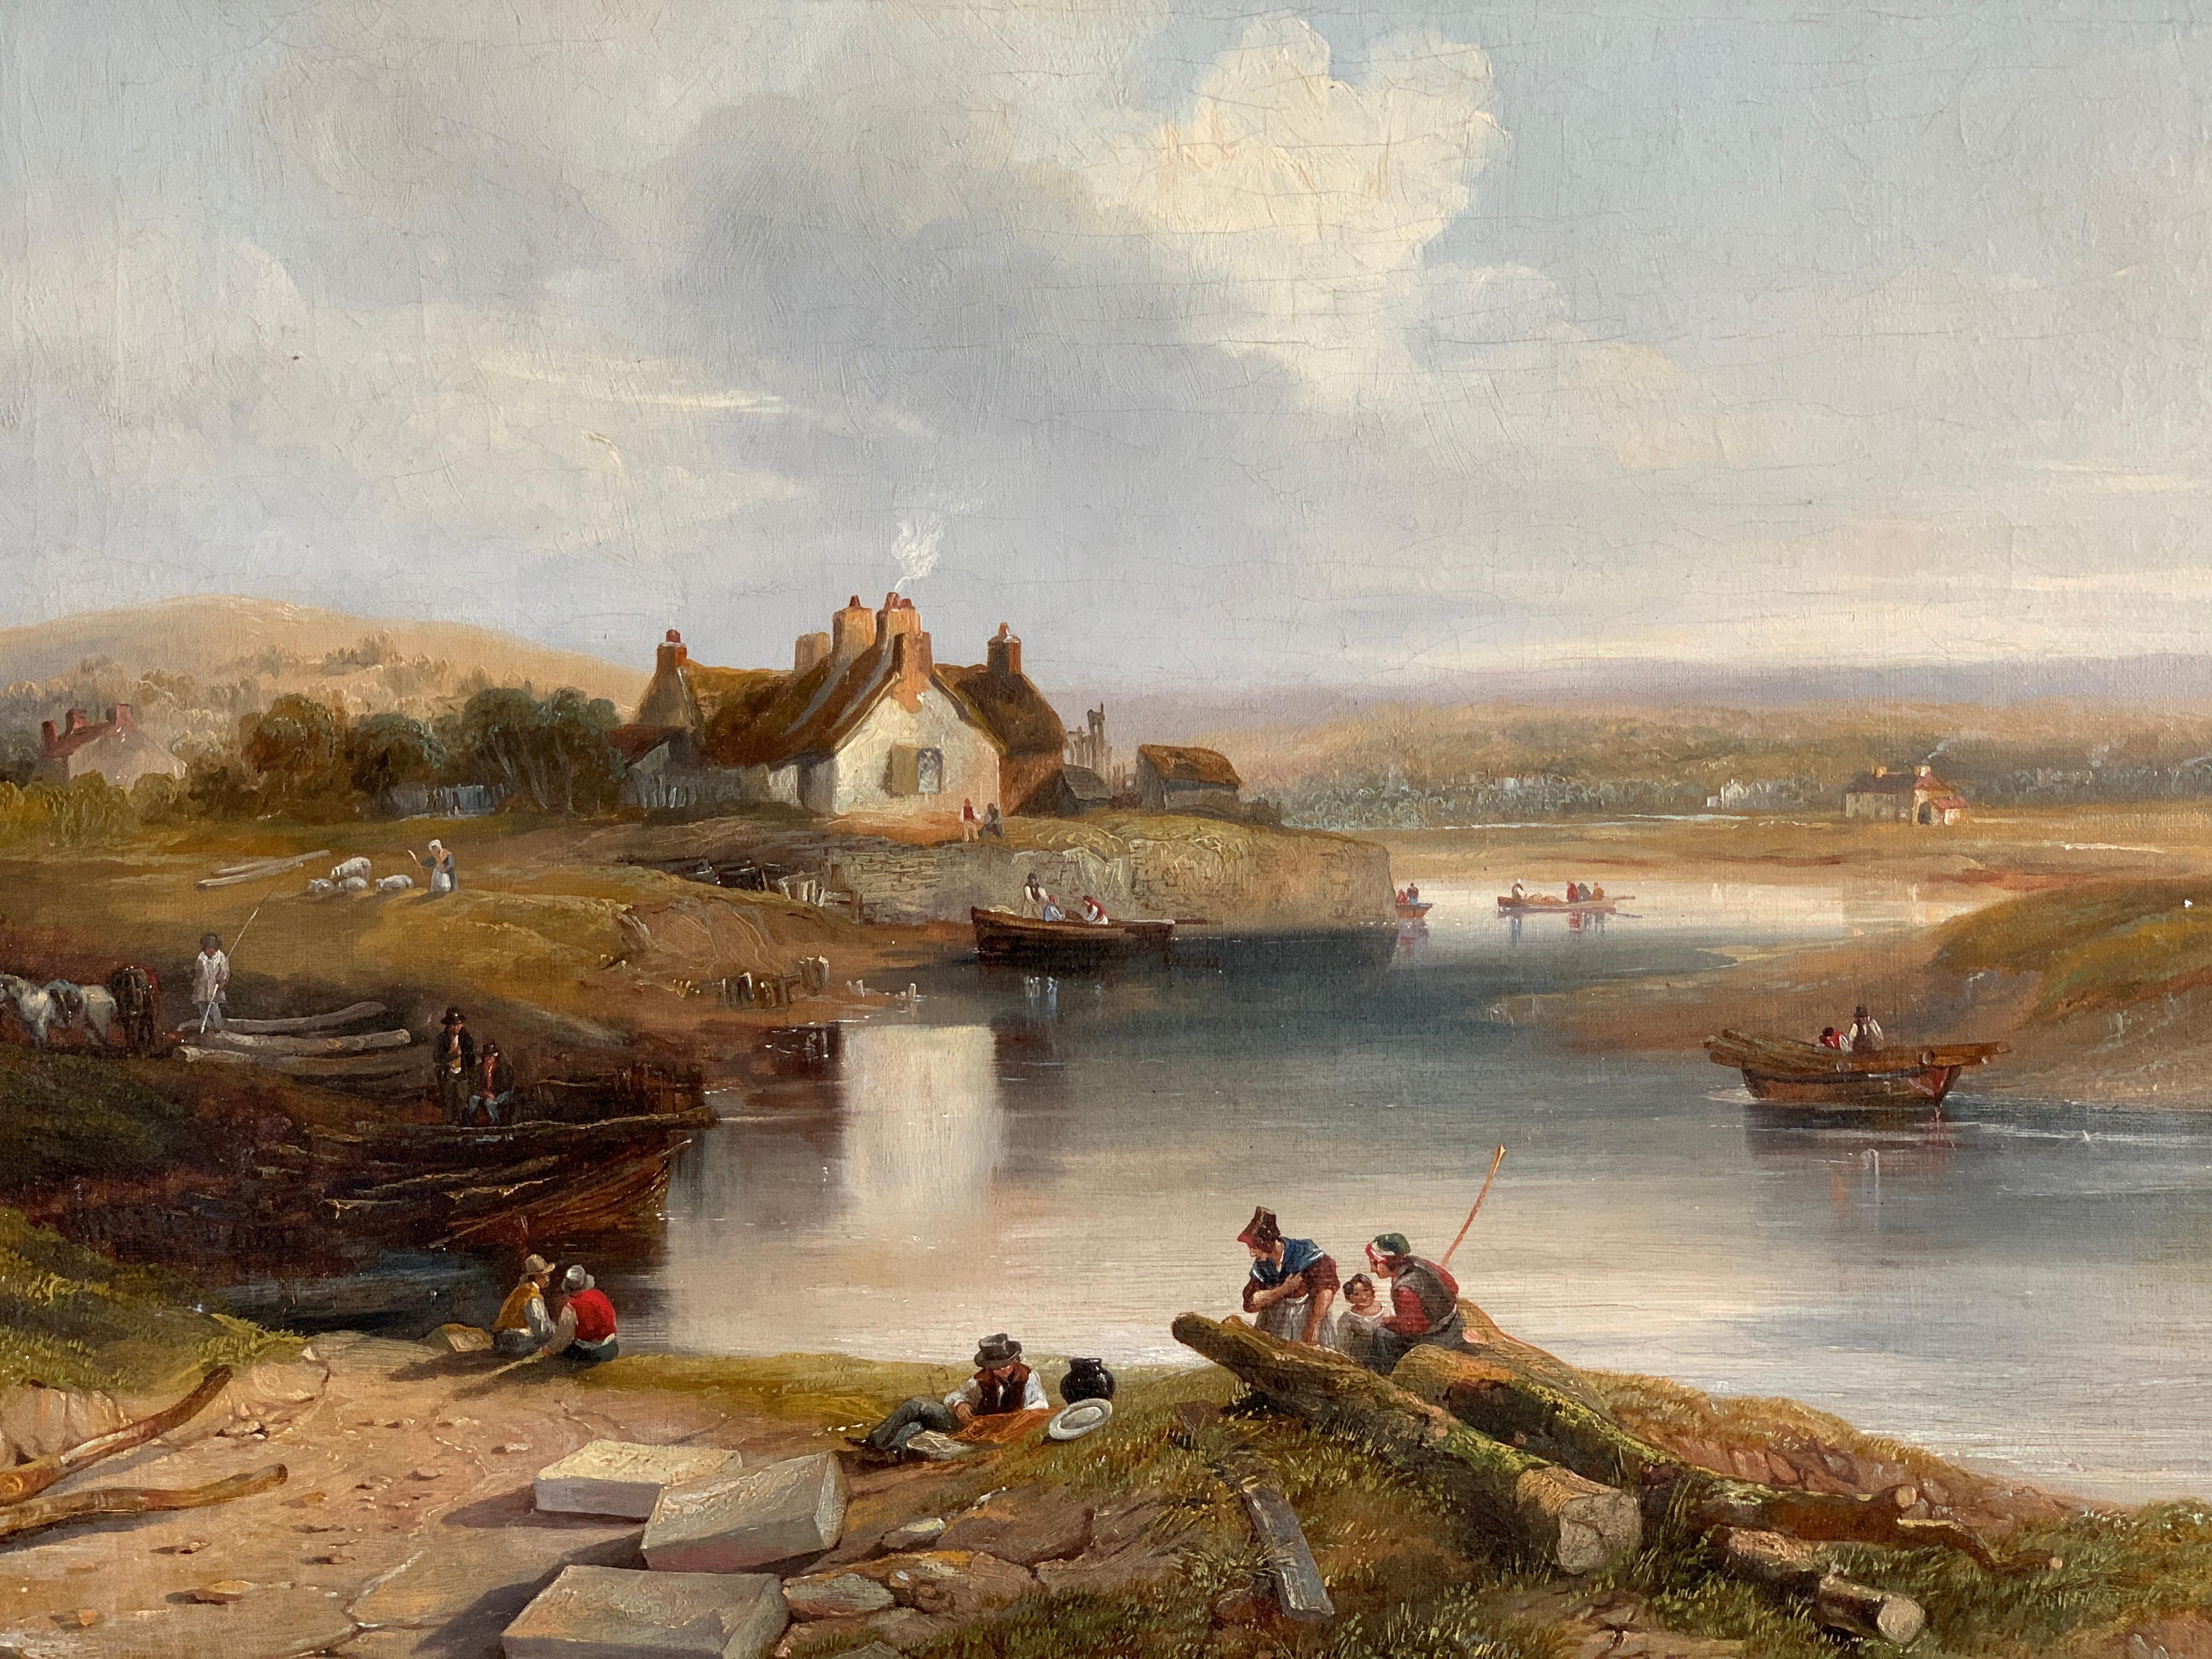 19th century English River landscape with figures, horses, cottage, sheep - Painting by John Frederick Tennant